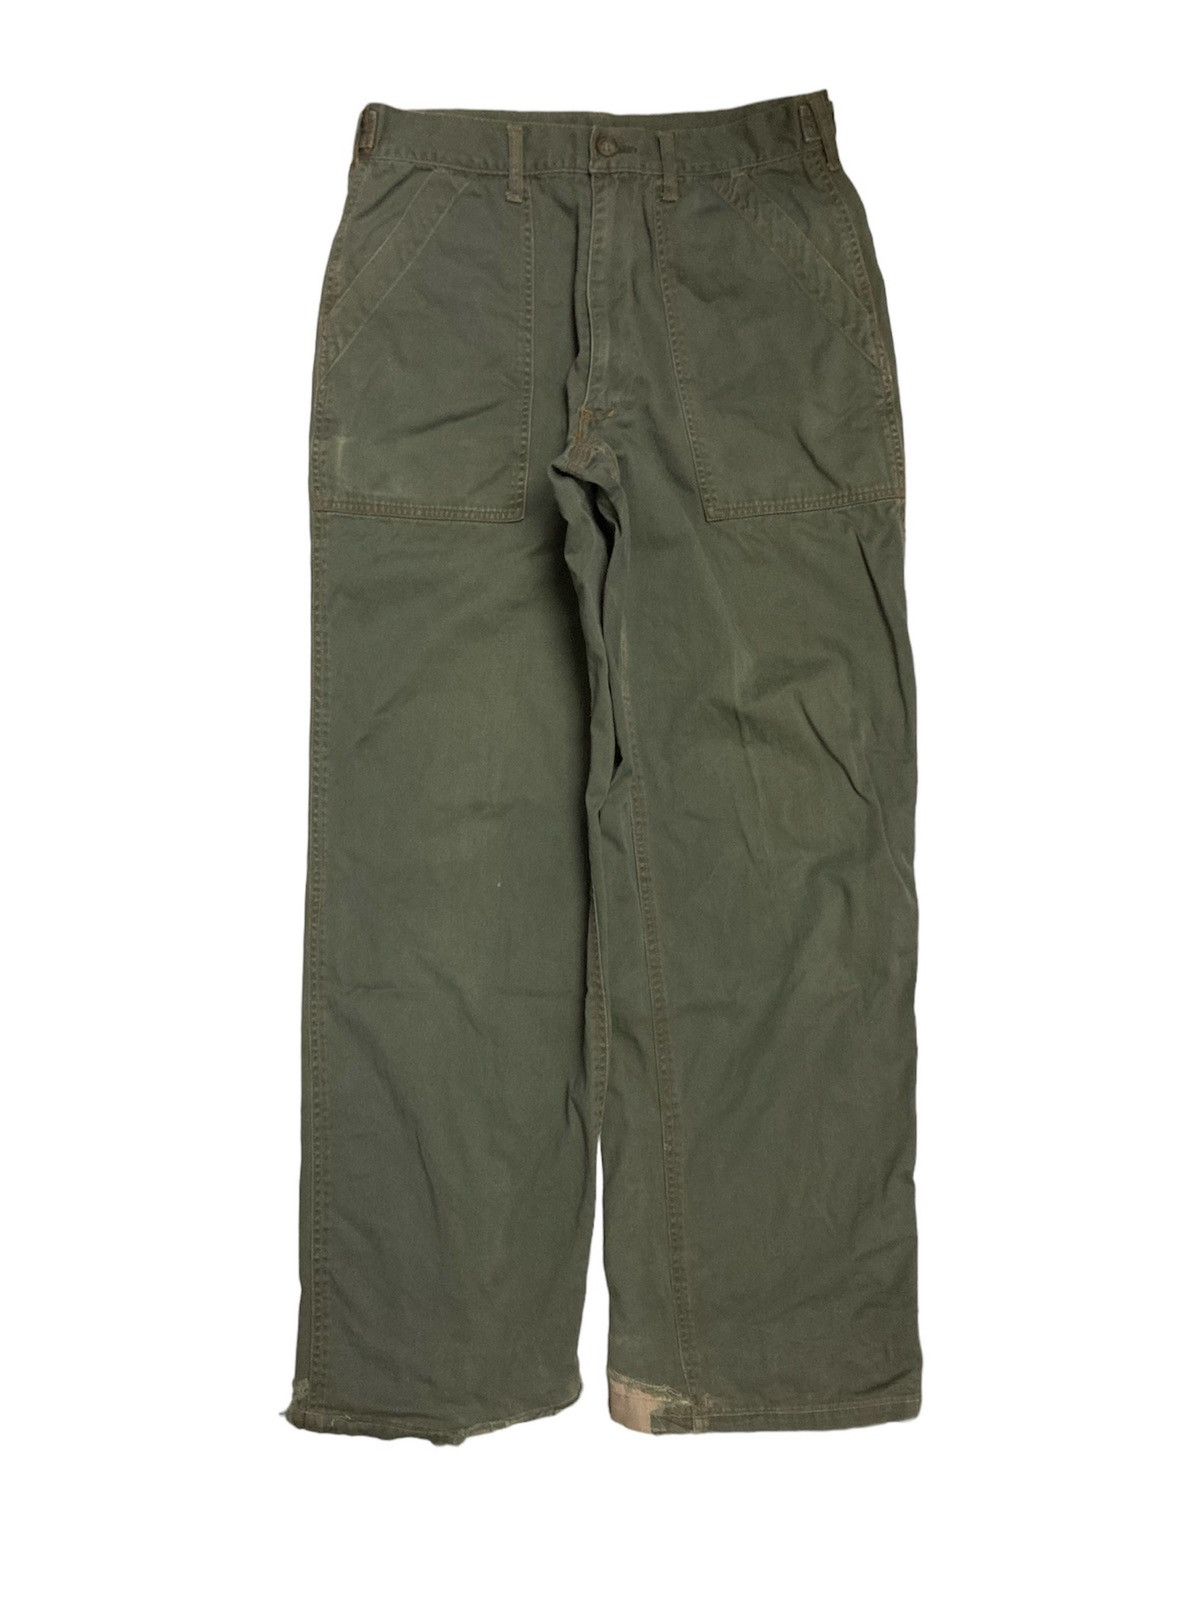 Vintage Soldout Japanese Brand Large Pocket Army Style Pants - 1